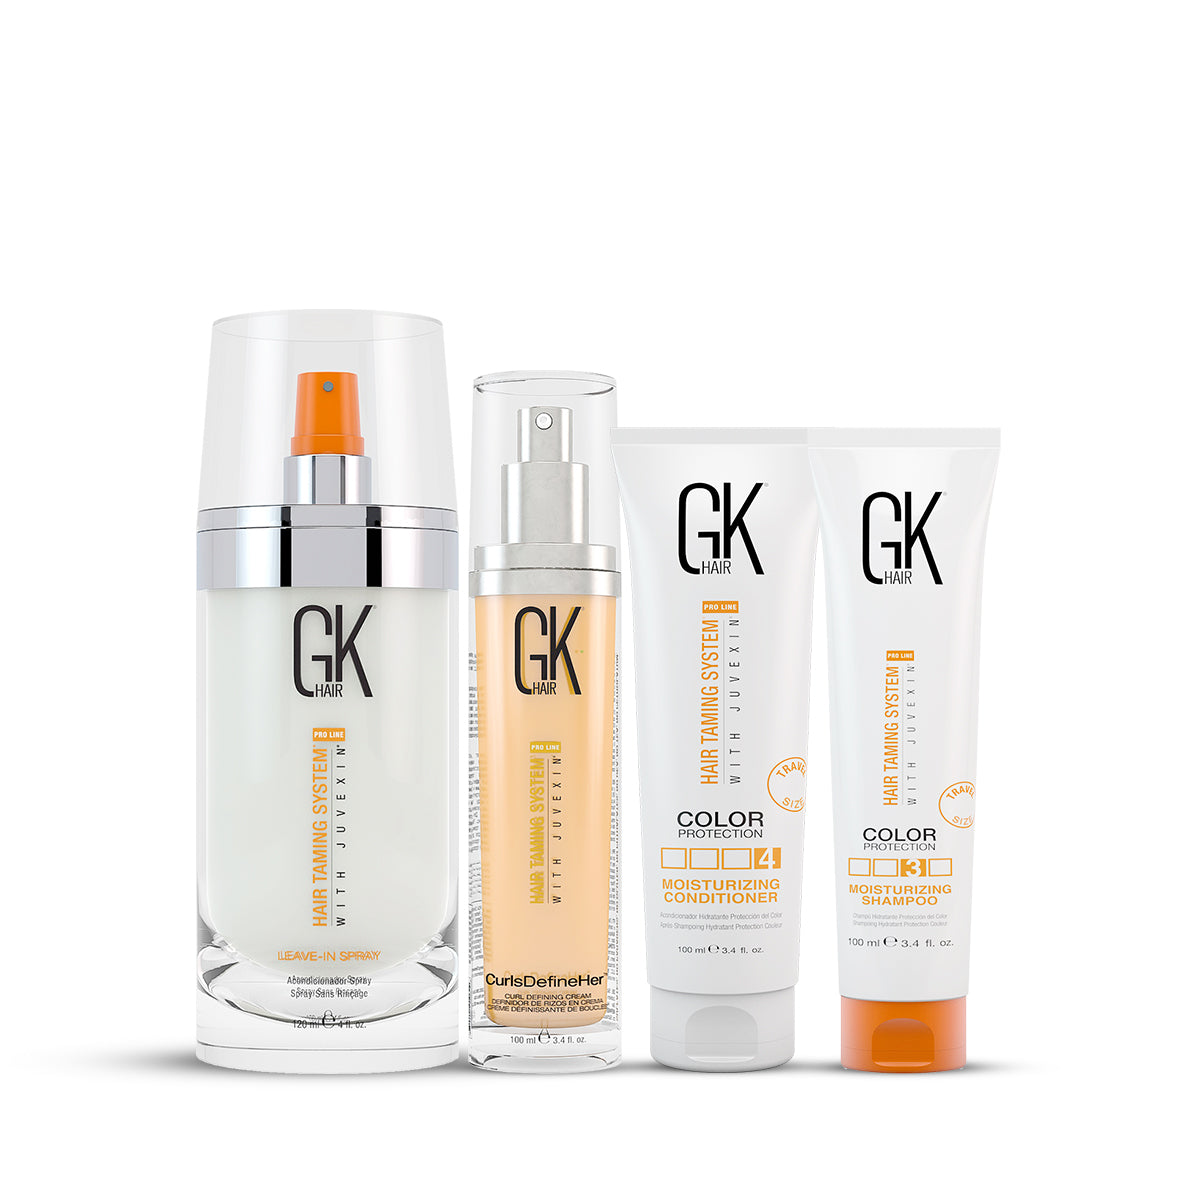 GK Hair Moisturizing Shampoo and Conditioner 100 Ml with CurlsDefineHer Spray and Leave In Conditioner Spray